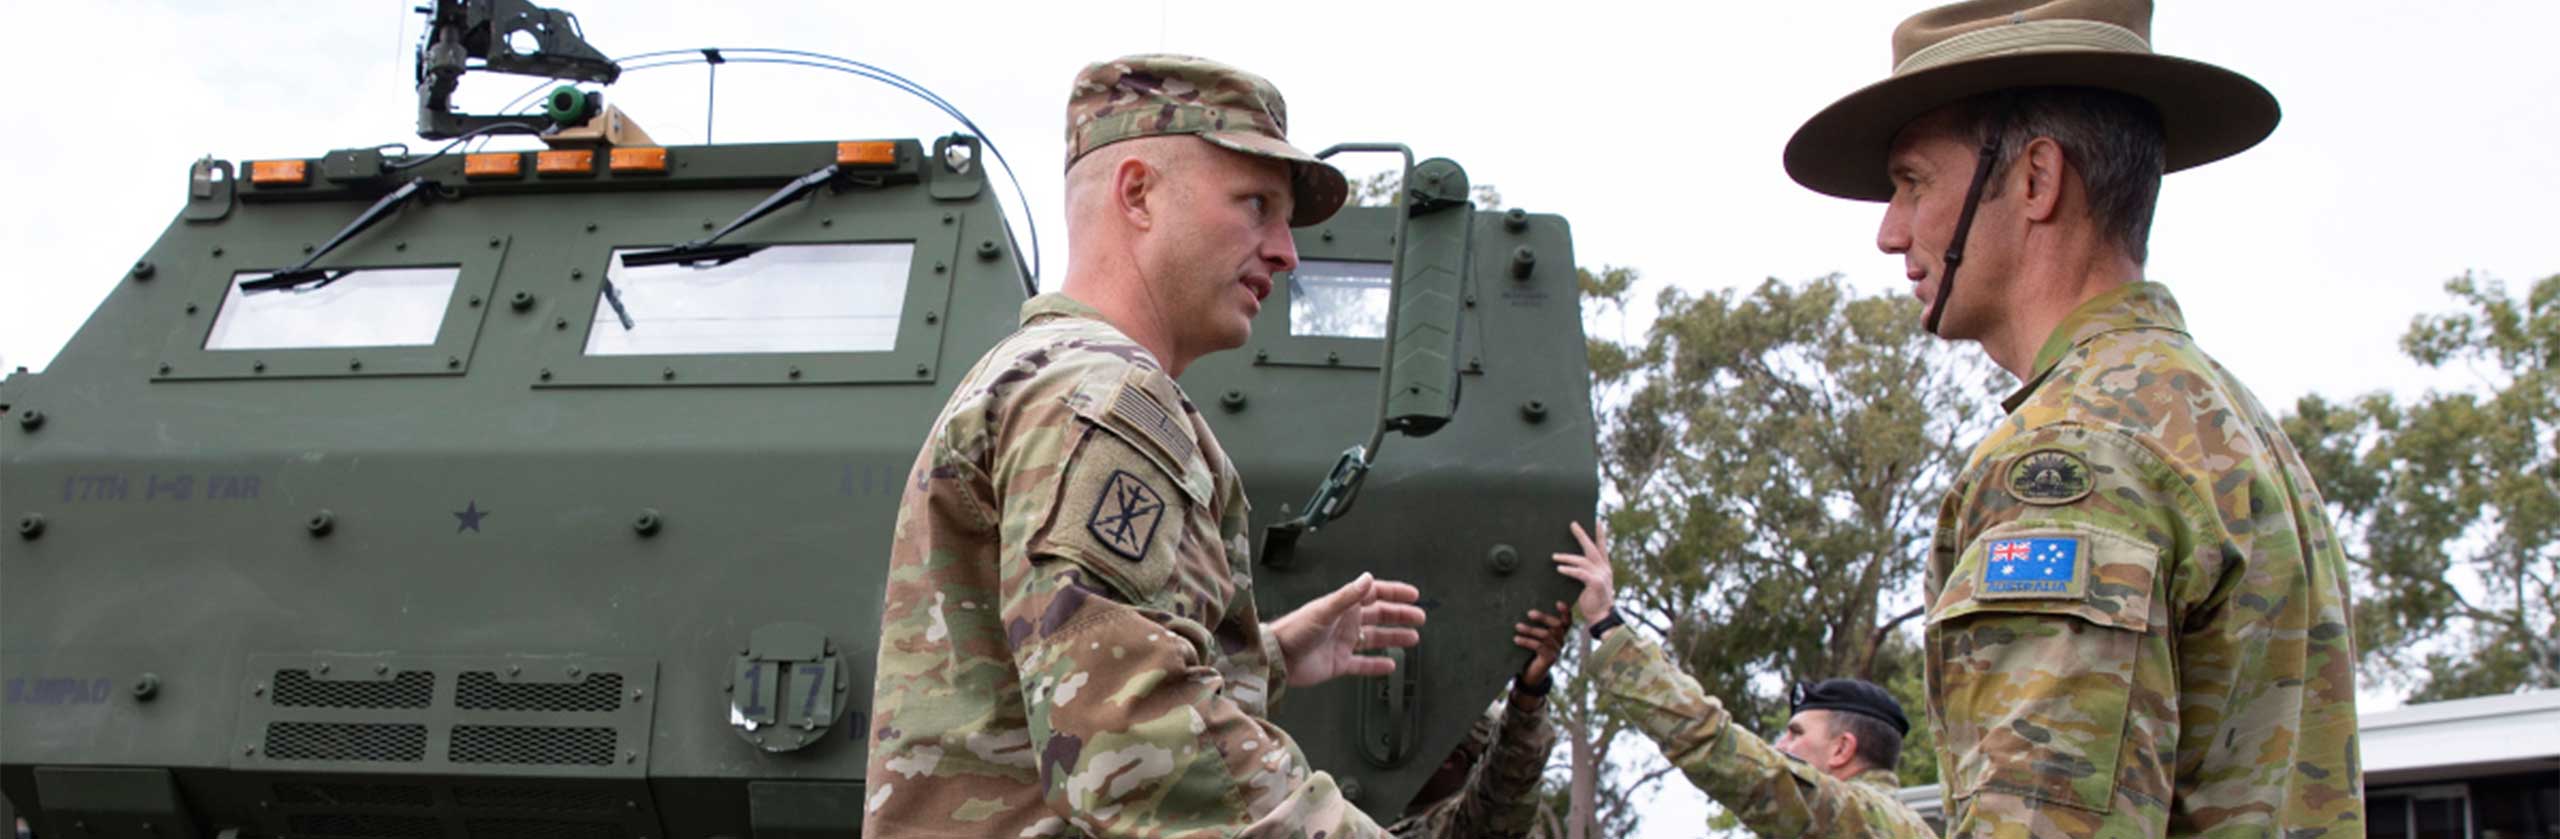 (Left) Colonel Andy Knight, Commander of the US Army’s 17th Field Artillery Brigade, briefs Brigadier Brett Chaloner (right), Commander of the Australian Army’s 13th Brigade, on the capabilities of a US Army High Mobility Artillery Rocket System (HIMARS) launcher during an open day for 13 Brigade members and guests at Irwin Barracks, Karrakatta, near Perth in Western Australia.Two HIMARS launchers from the 17th Field Artillery Brigade are in Western Australia for Exercise HIGHBALL, which will develop how the Australian Defence Force employs long-range land-based precision rocket and missile systems.